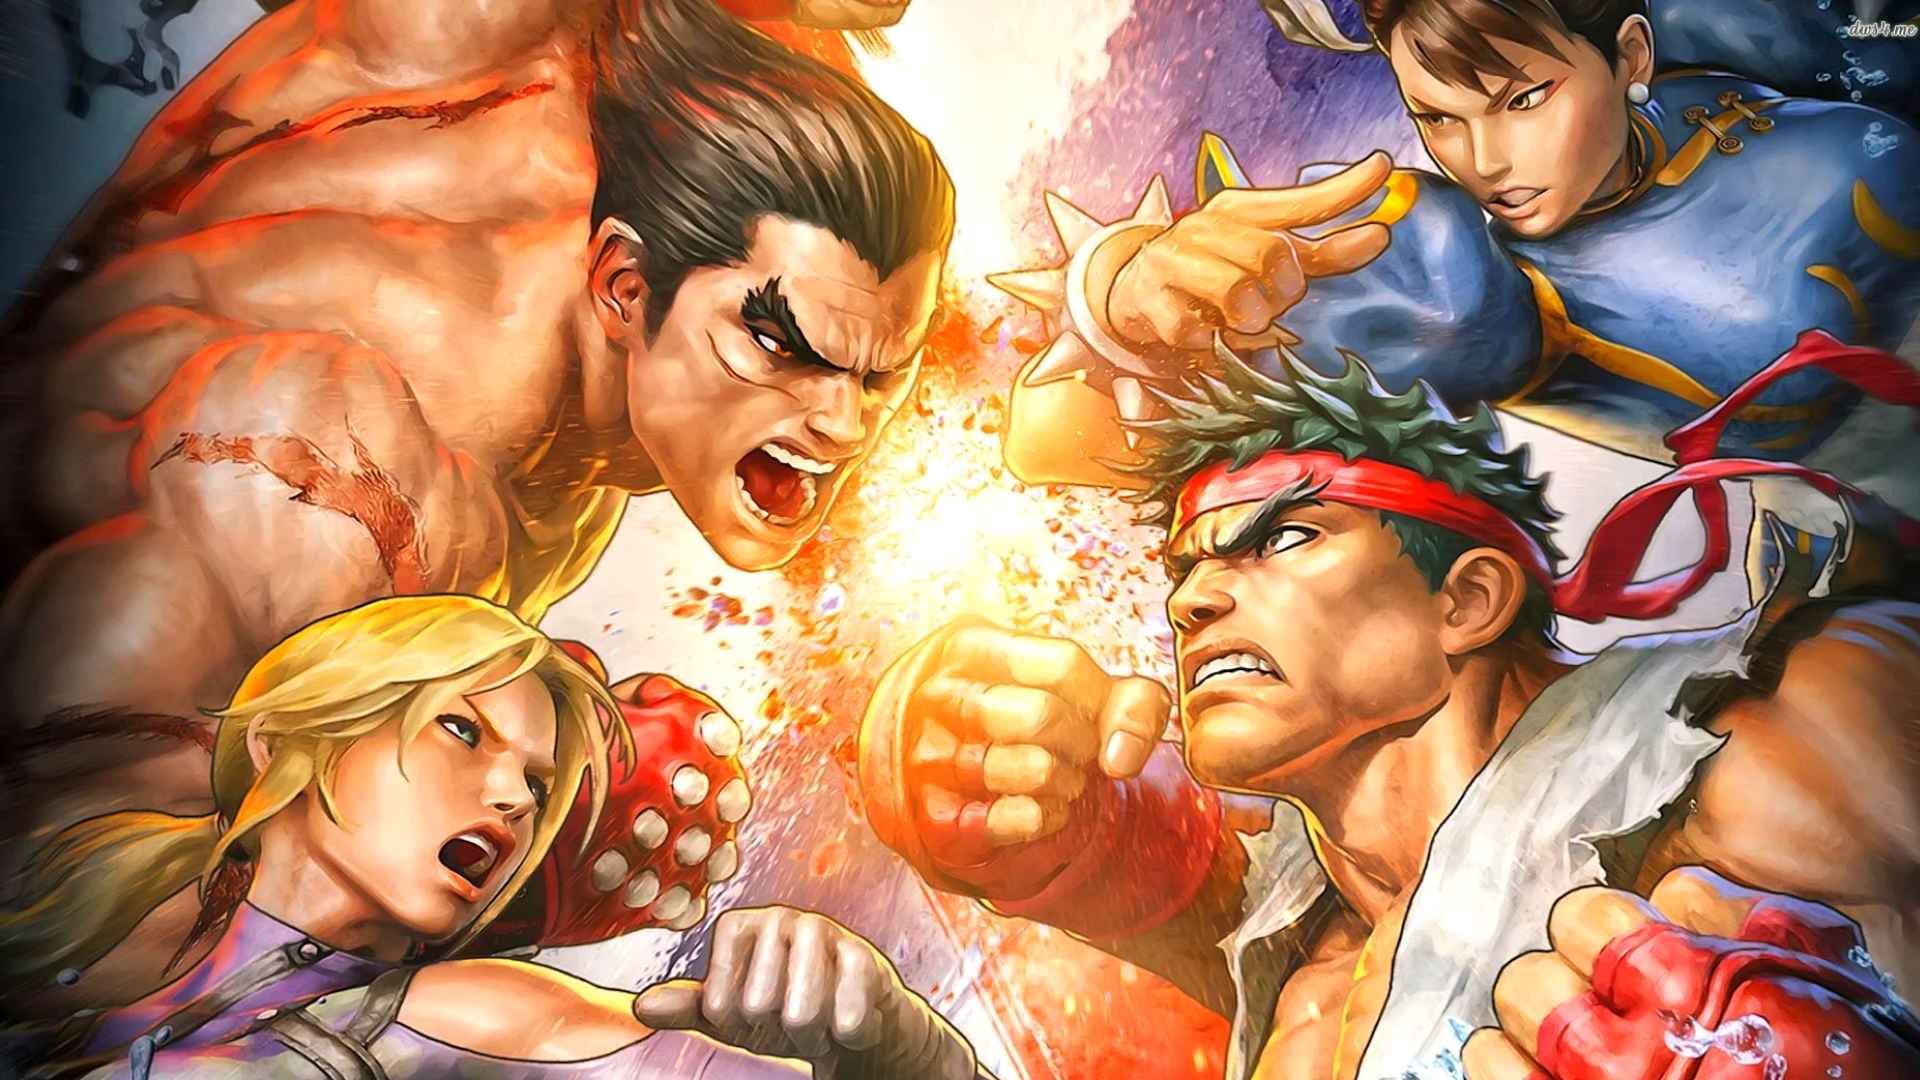 Street Fighter x Tekken was a great game that released at a wrong time